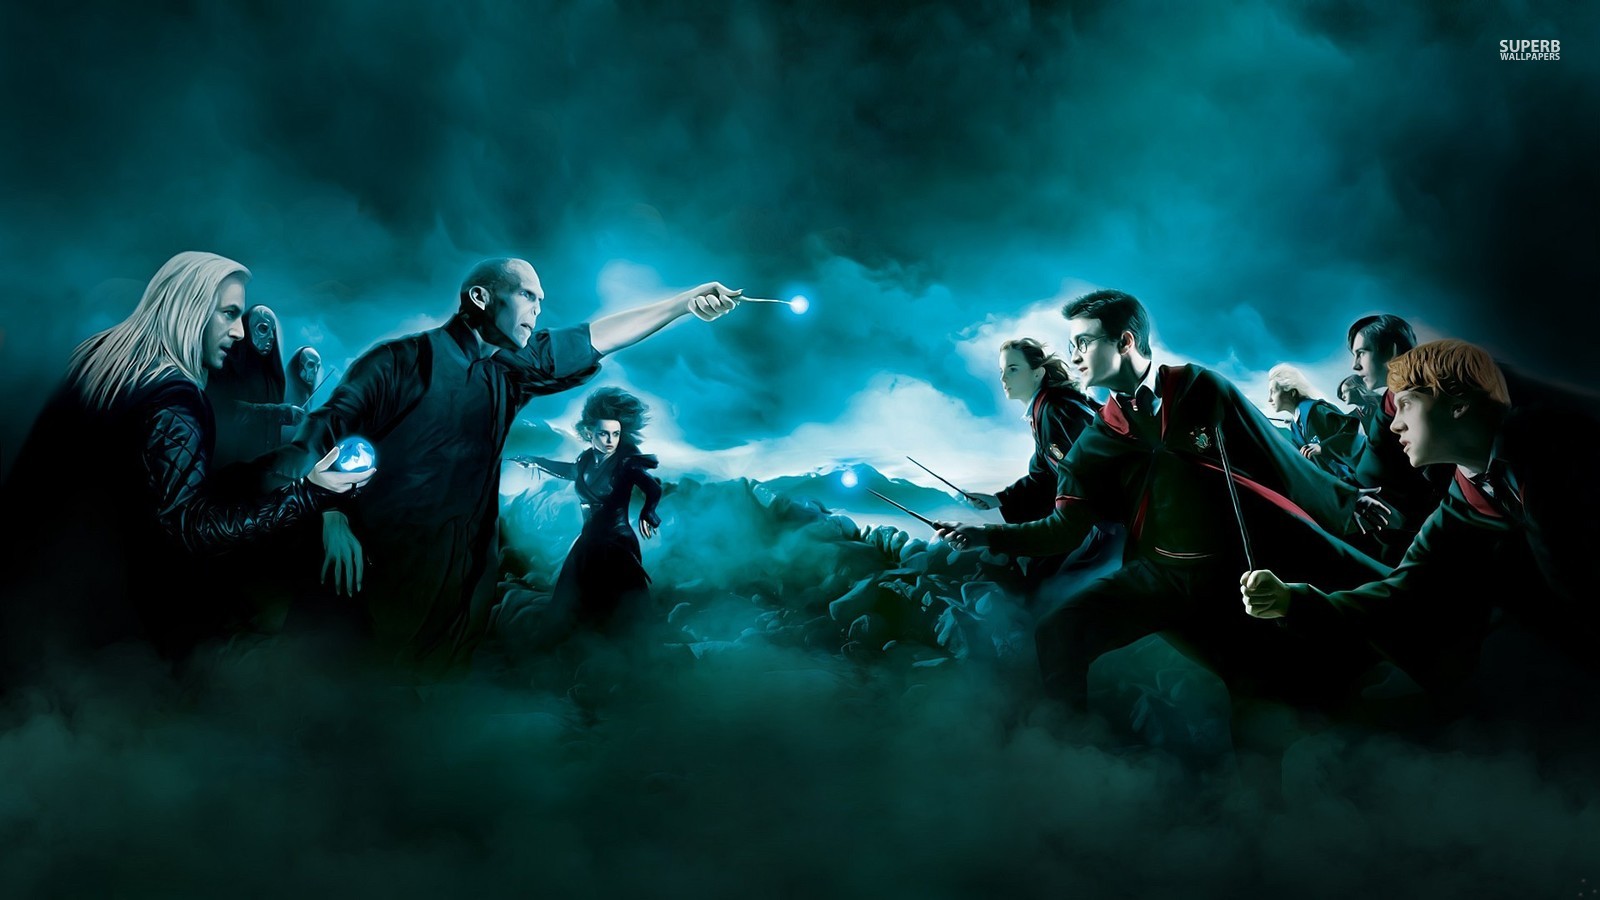 Harry Potter and the Deathly Hallows - Harry Potter Wallpaper (38684856